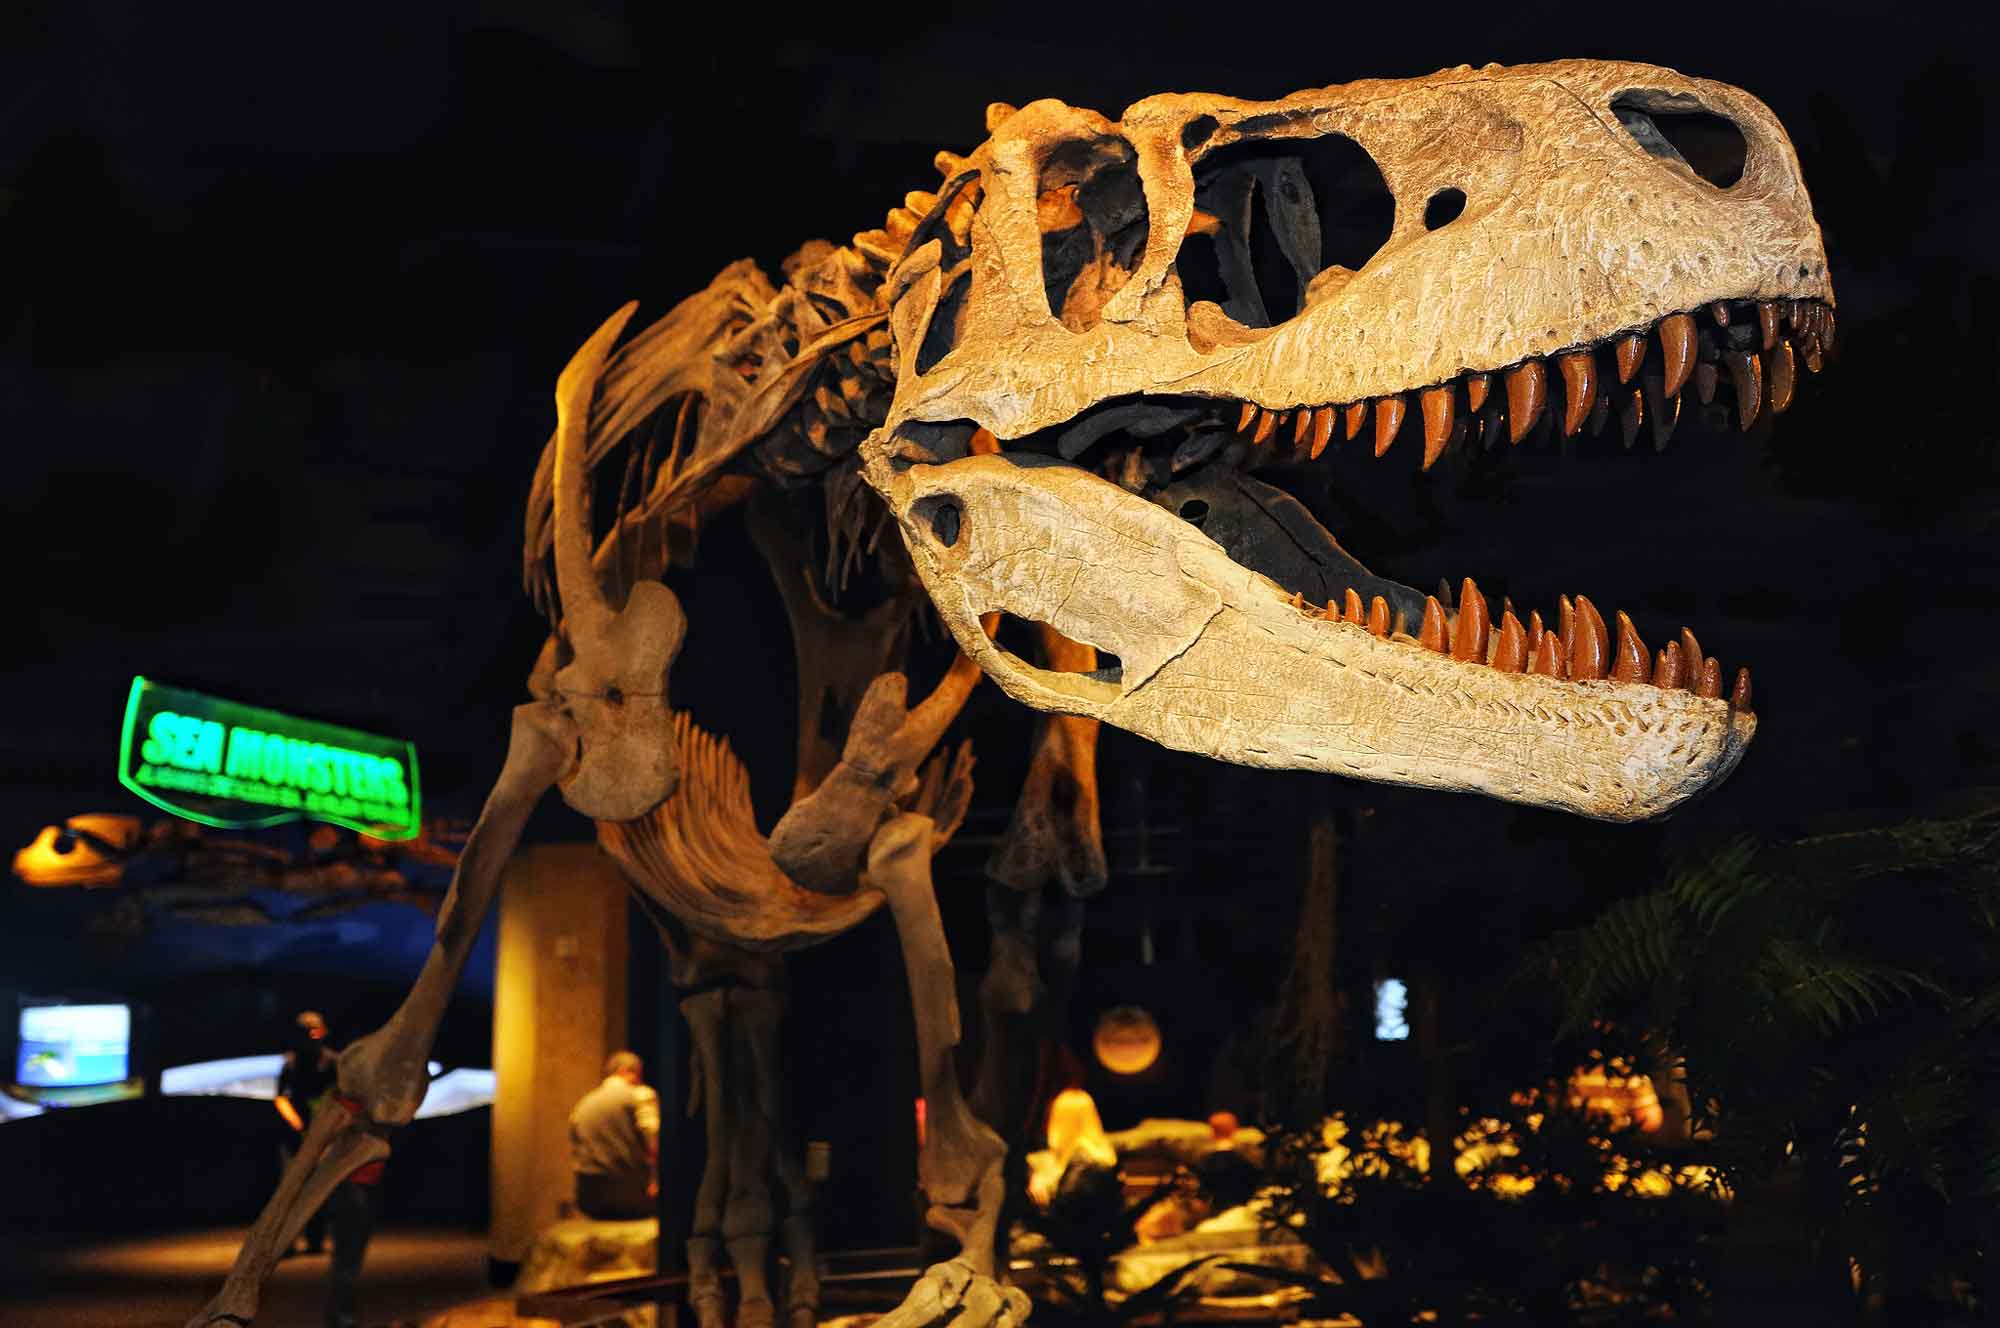 Photograph of the skeleton of the dinosaur Appalachiosaurus on display at the McWane Science Center.